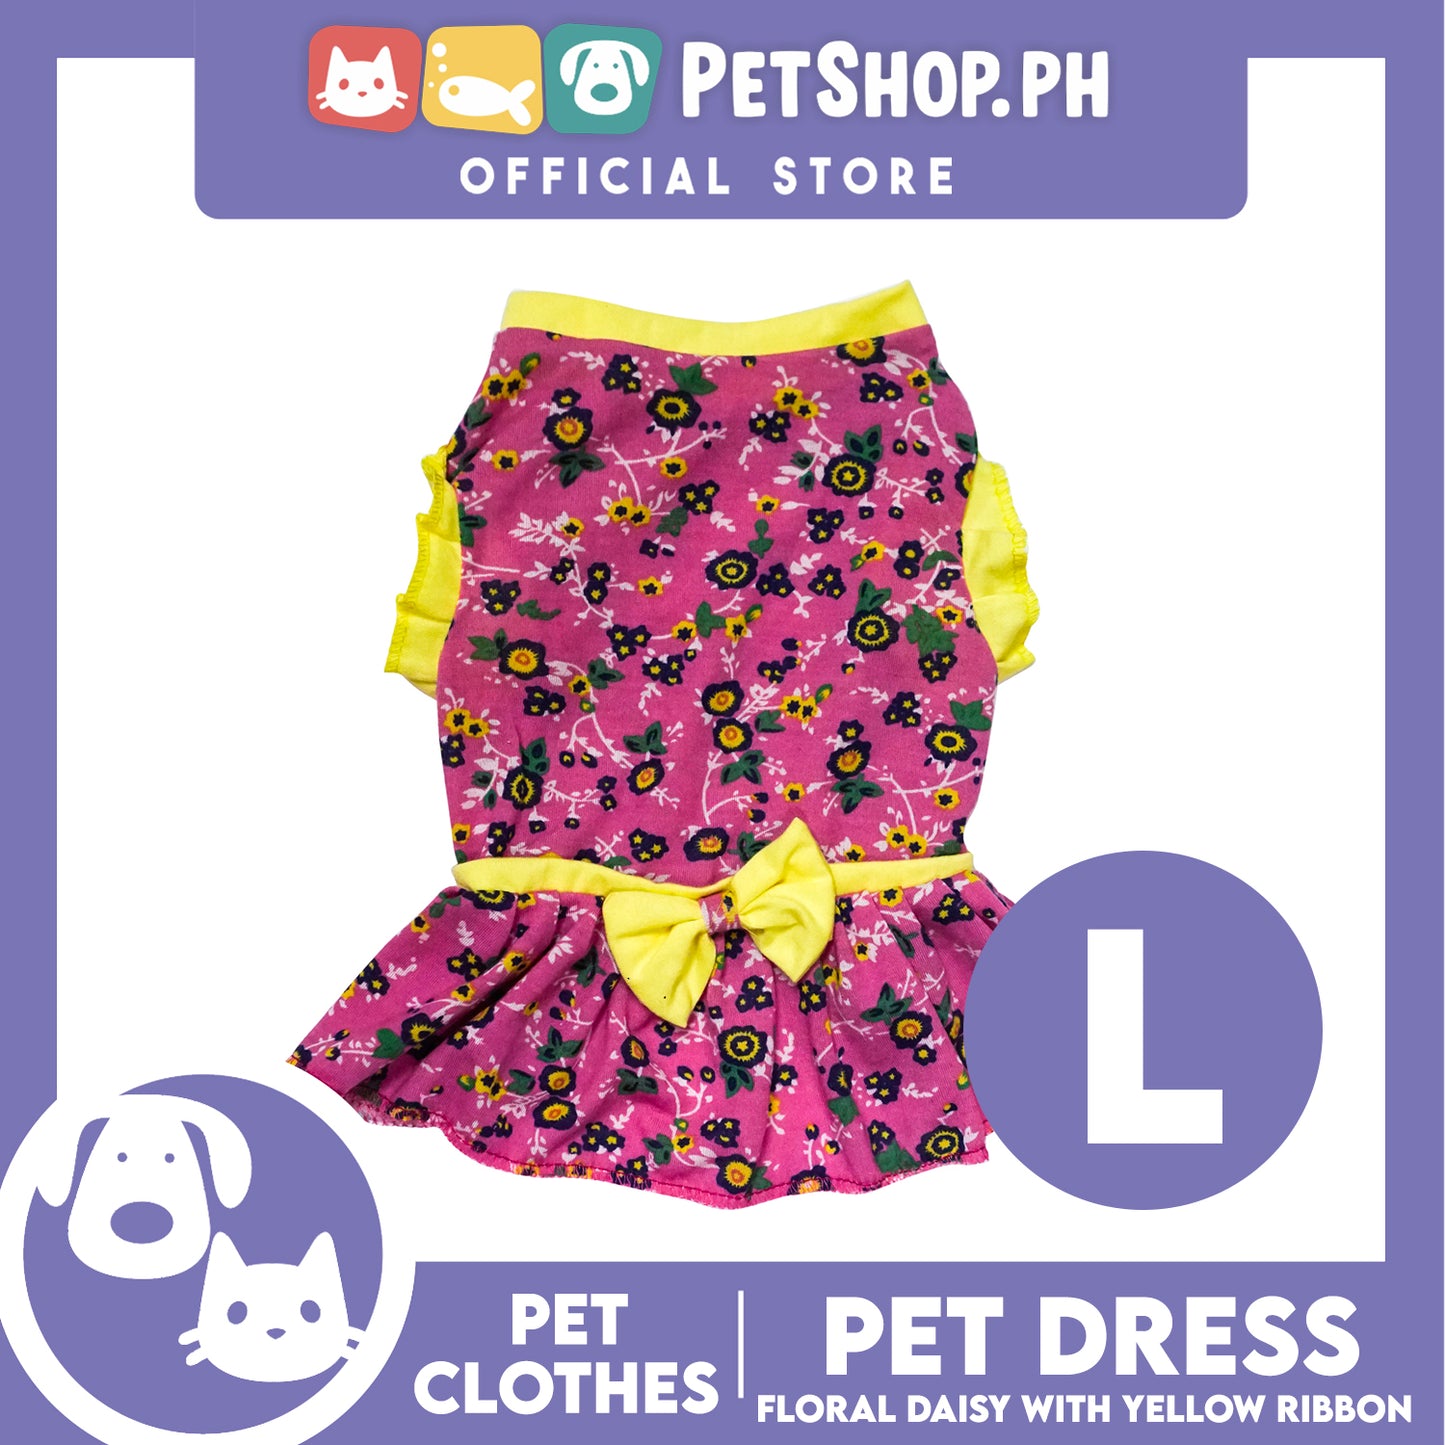 Pet Dress Floral Daisy with Yellow Ribbon (Large) Pet Dress Clothes Perfect for Dog